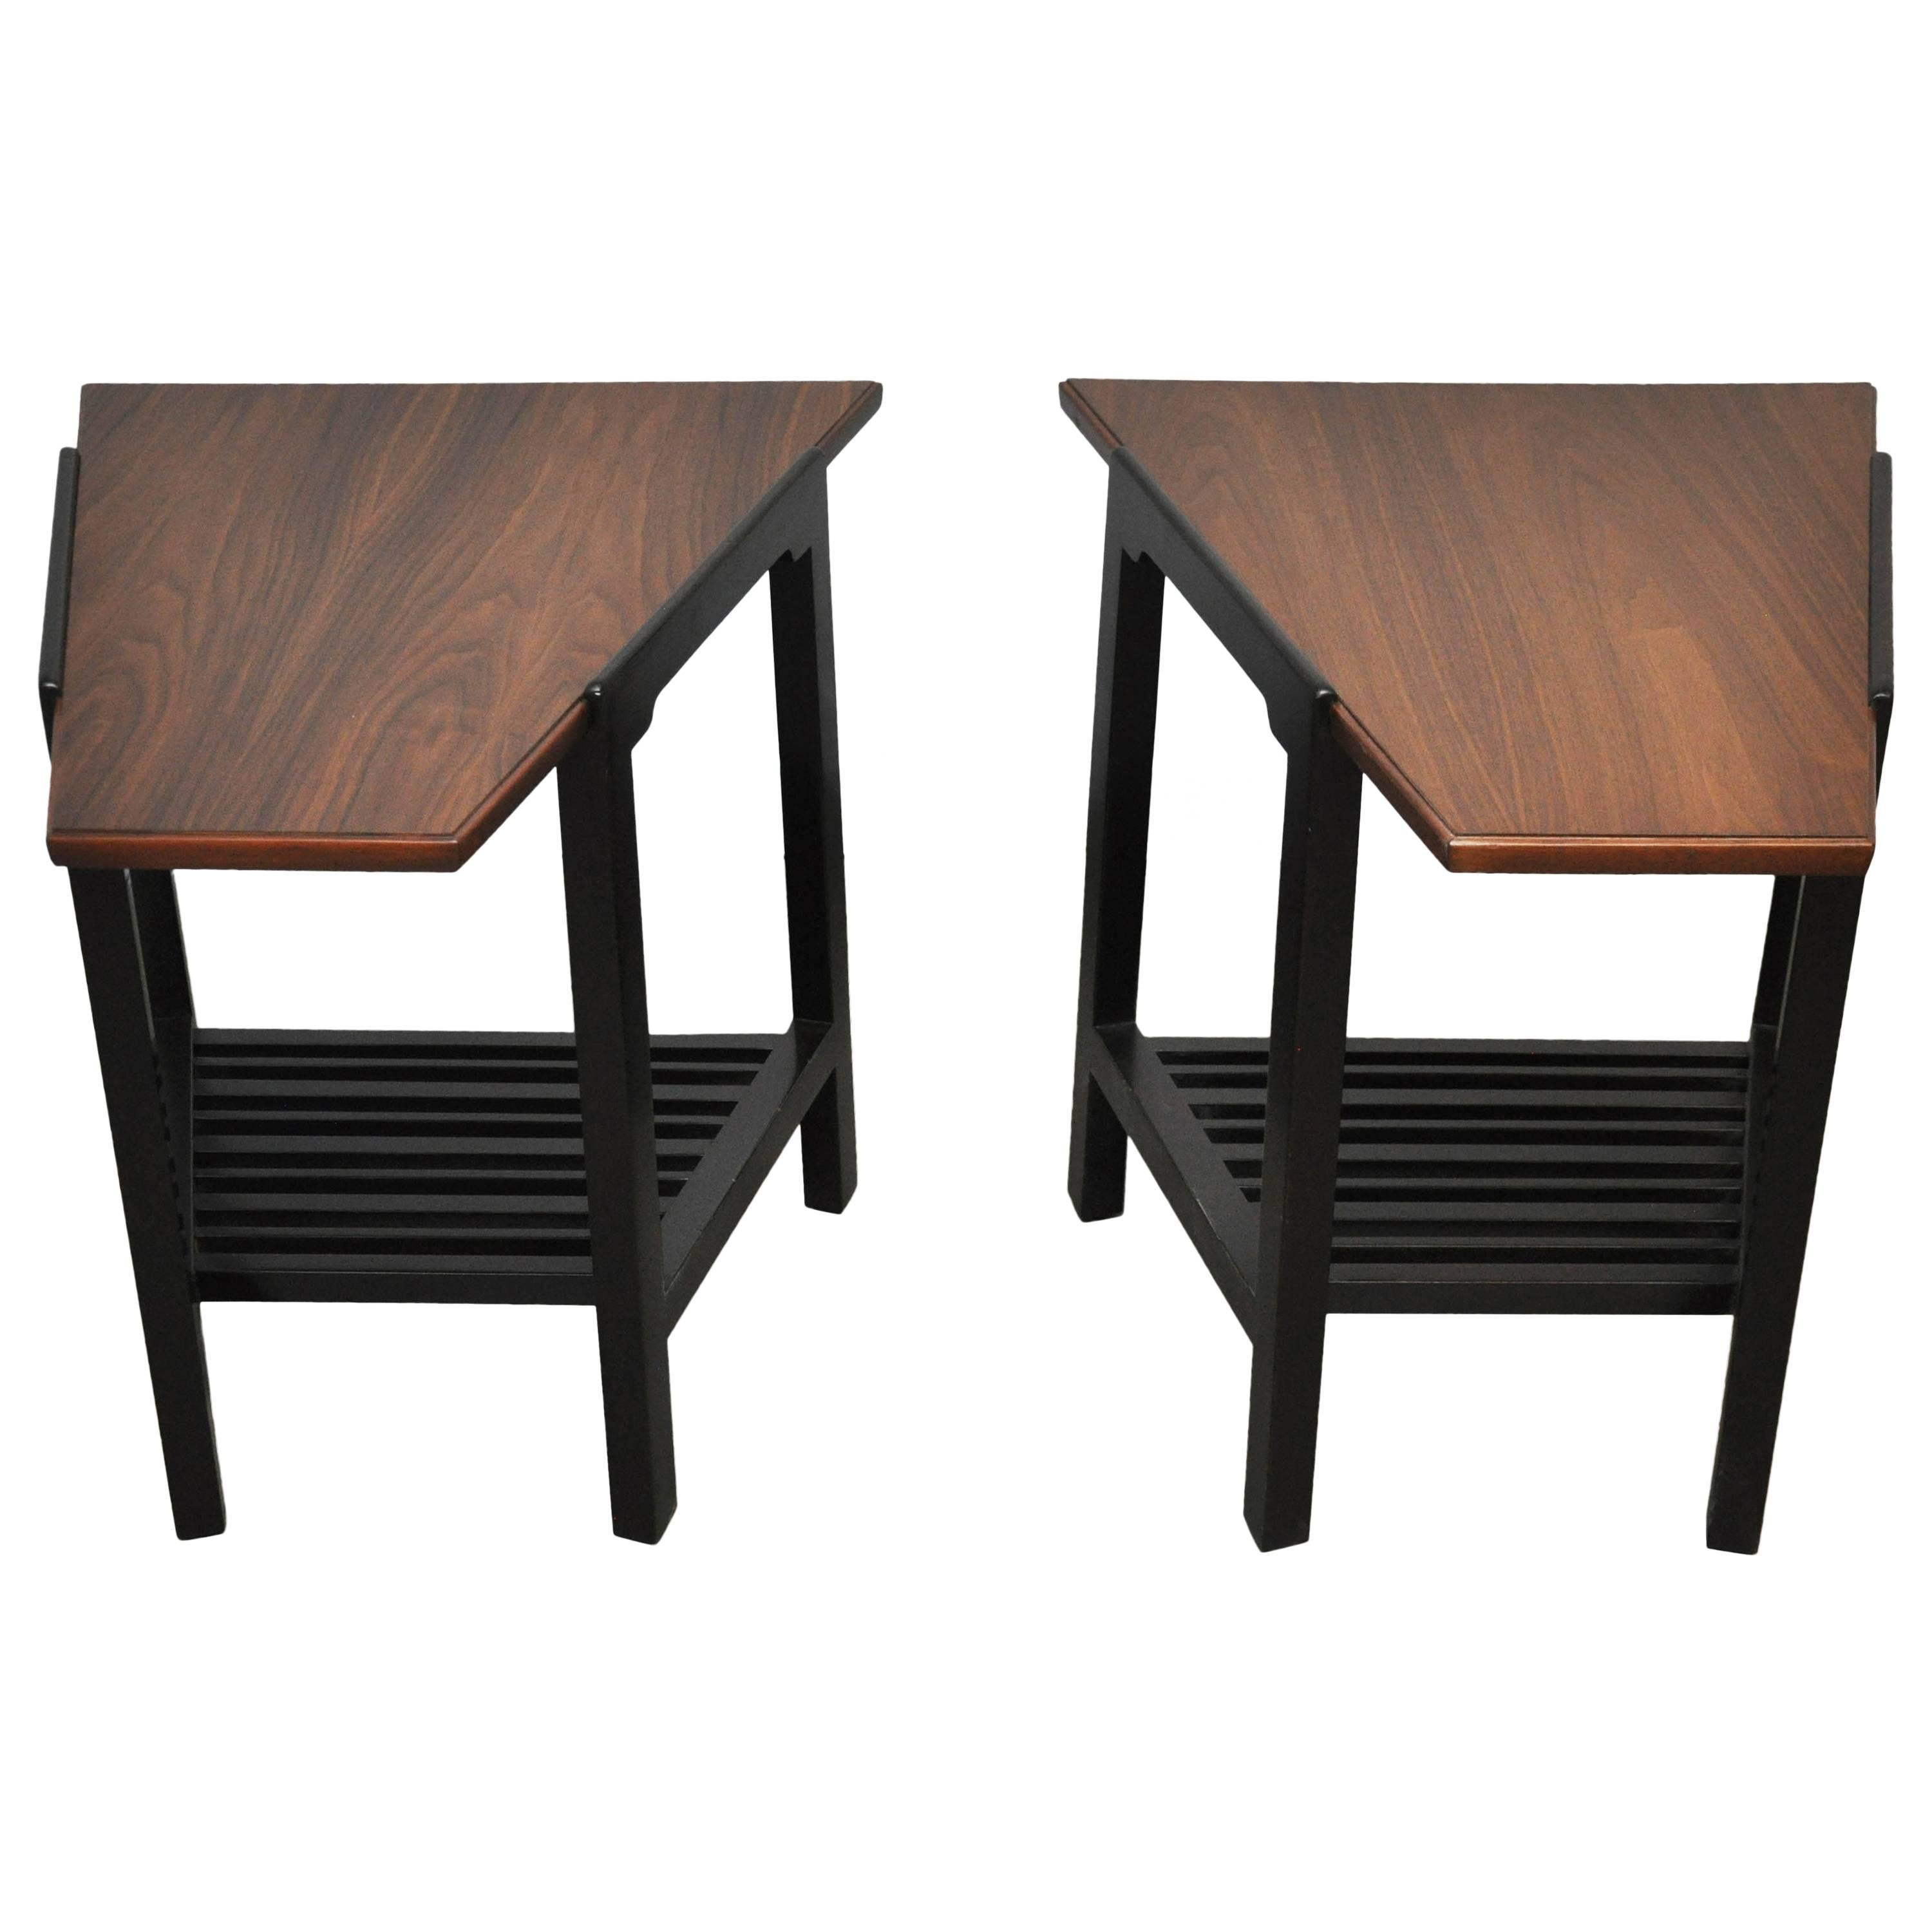 Wedge form end tables by Edward Wormley for Dunbar. Refinished walnut tops over espresso tone bases.